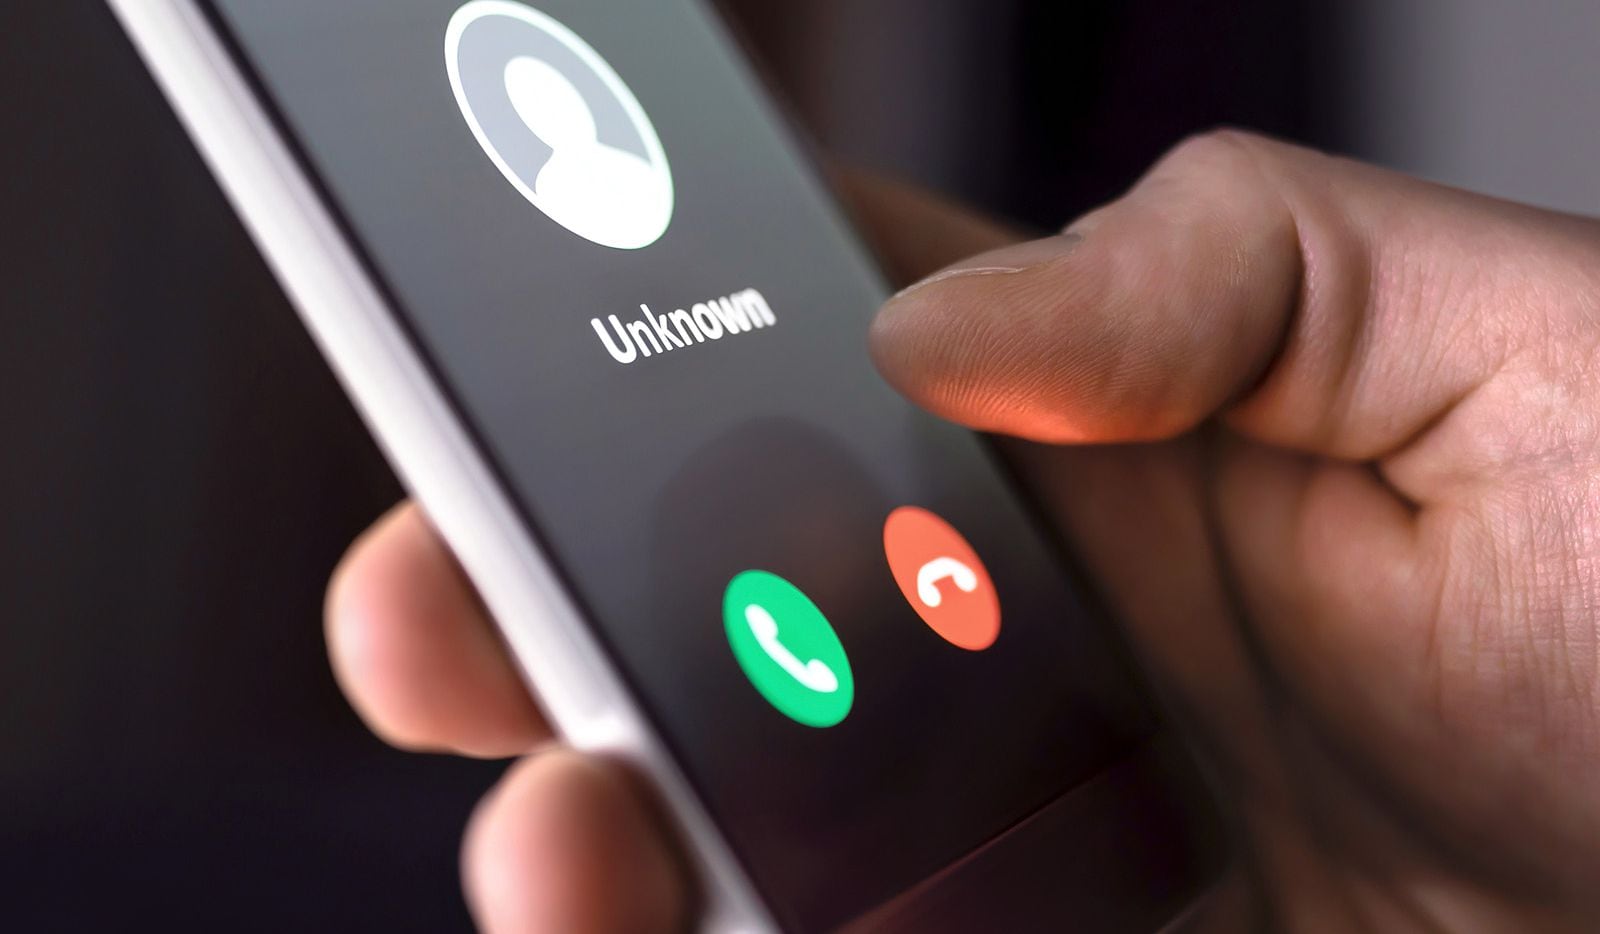 Despite recent enforcement efforts, the robocall industry continues to thrive. We propose a...